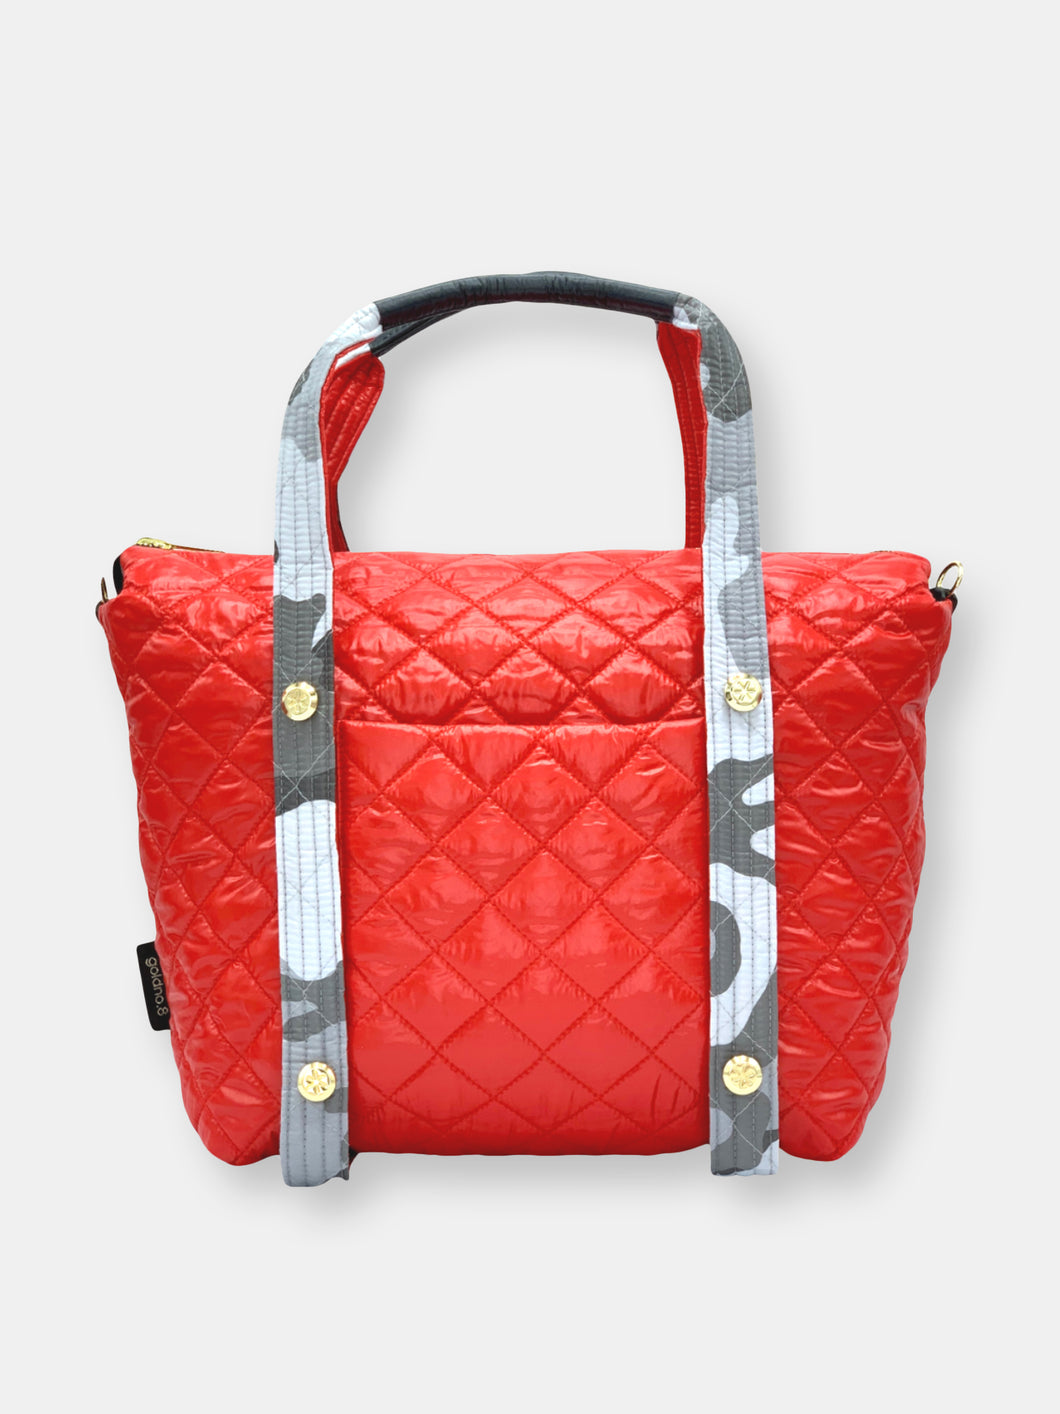 The Reversible Carryall